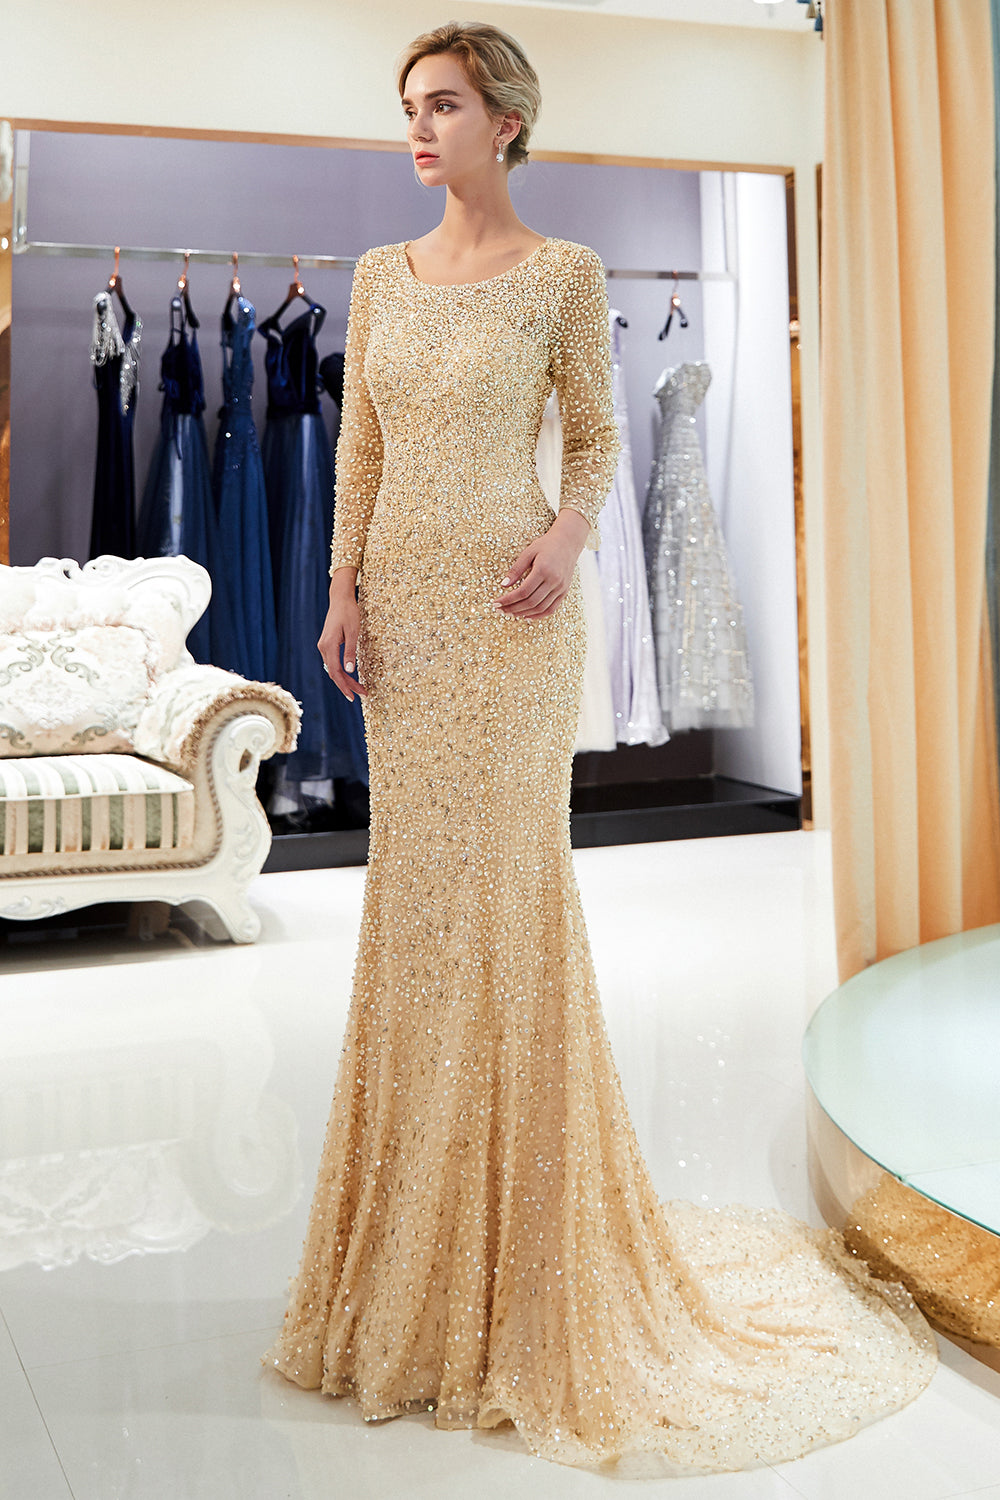 Long Mermaid Sequins Formal Evening Dresses with Sleeves-BIZTUNNEL